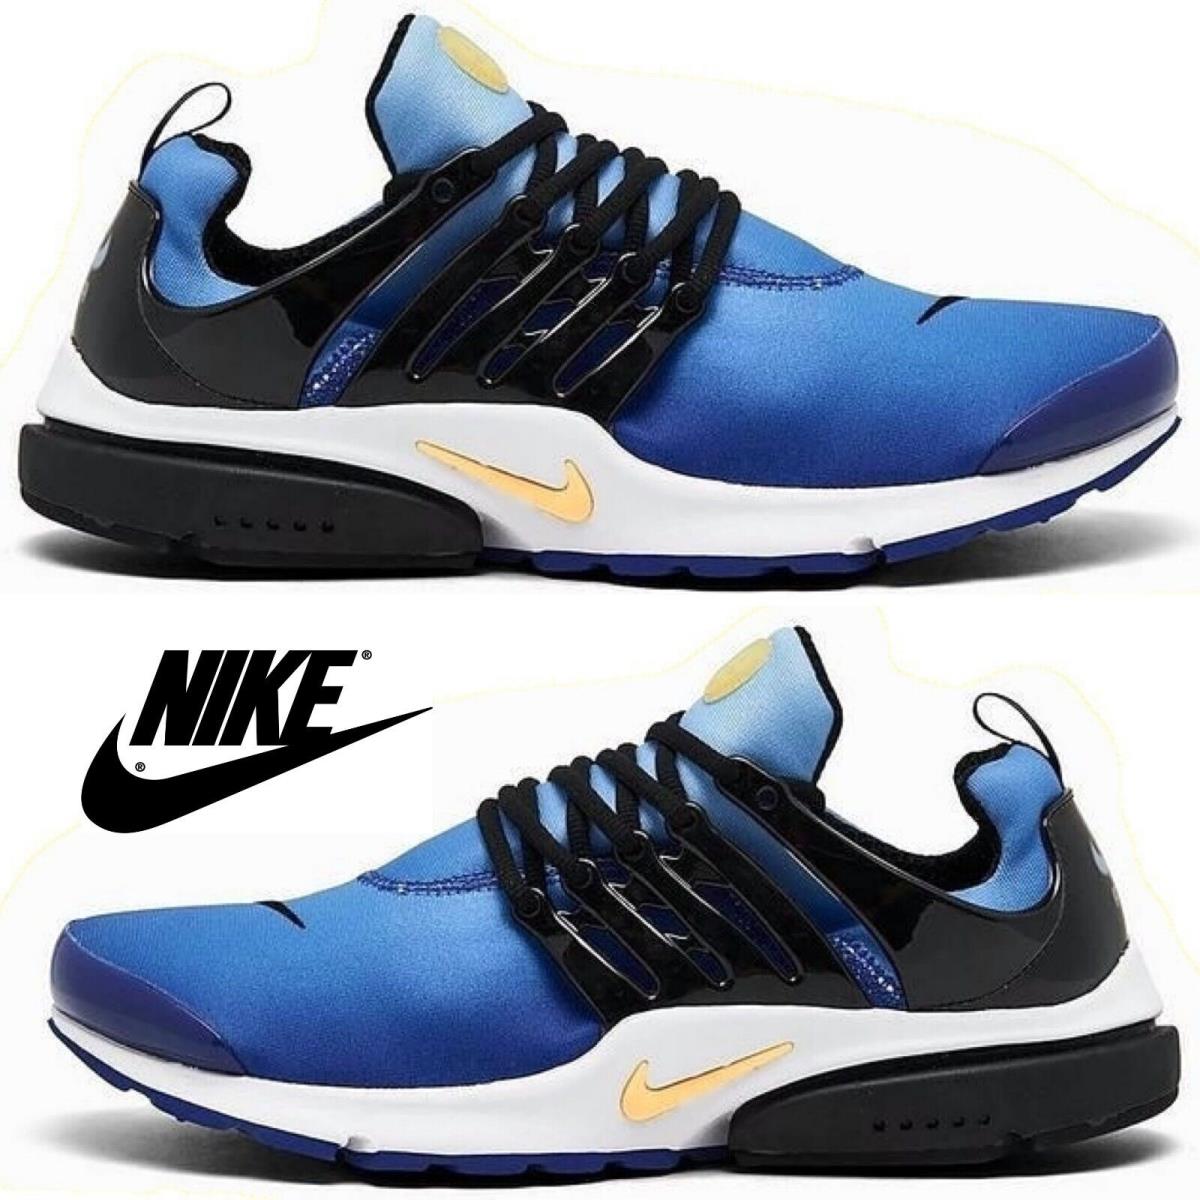 Nike Air Presto Running Sneakers Mens Athletic Comfort Casual Shoes Black Blue - Blue , Hyper Blue/Black/Sky Blue/Chamois Manufacturer